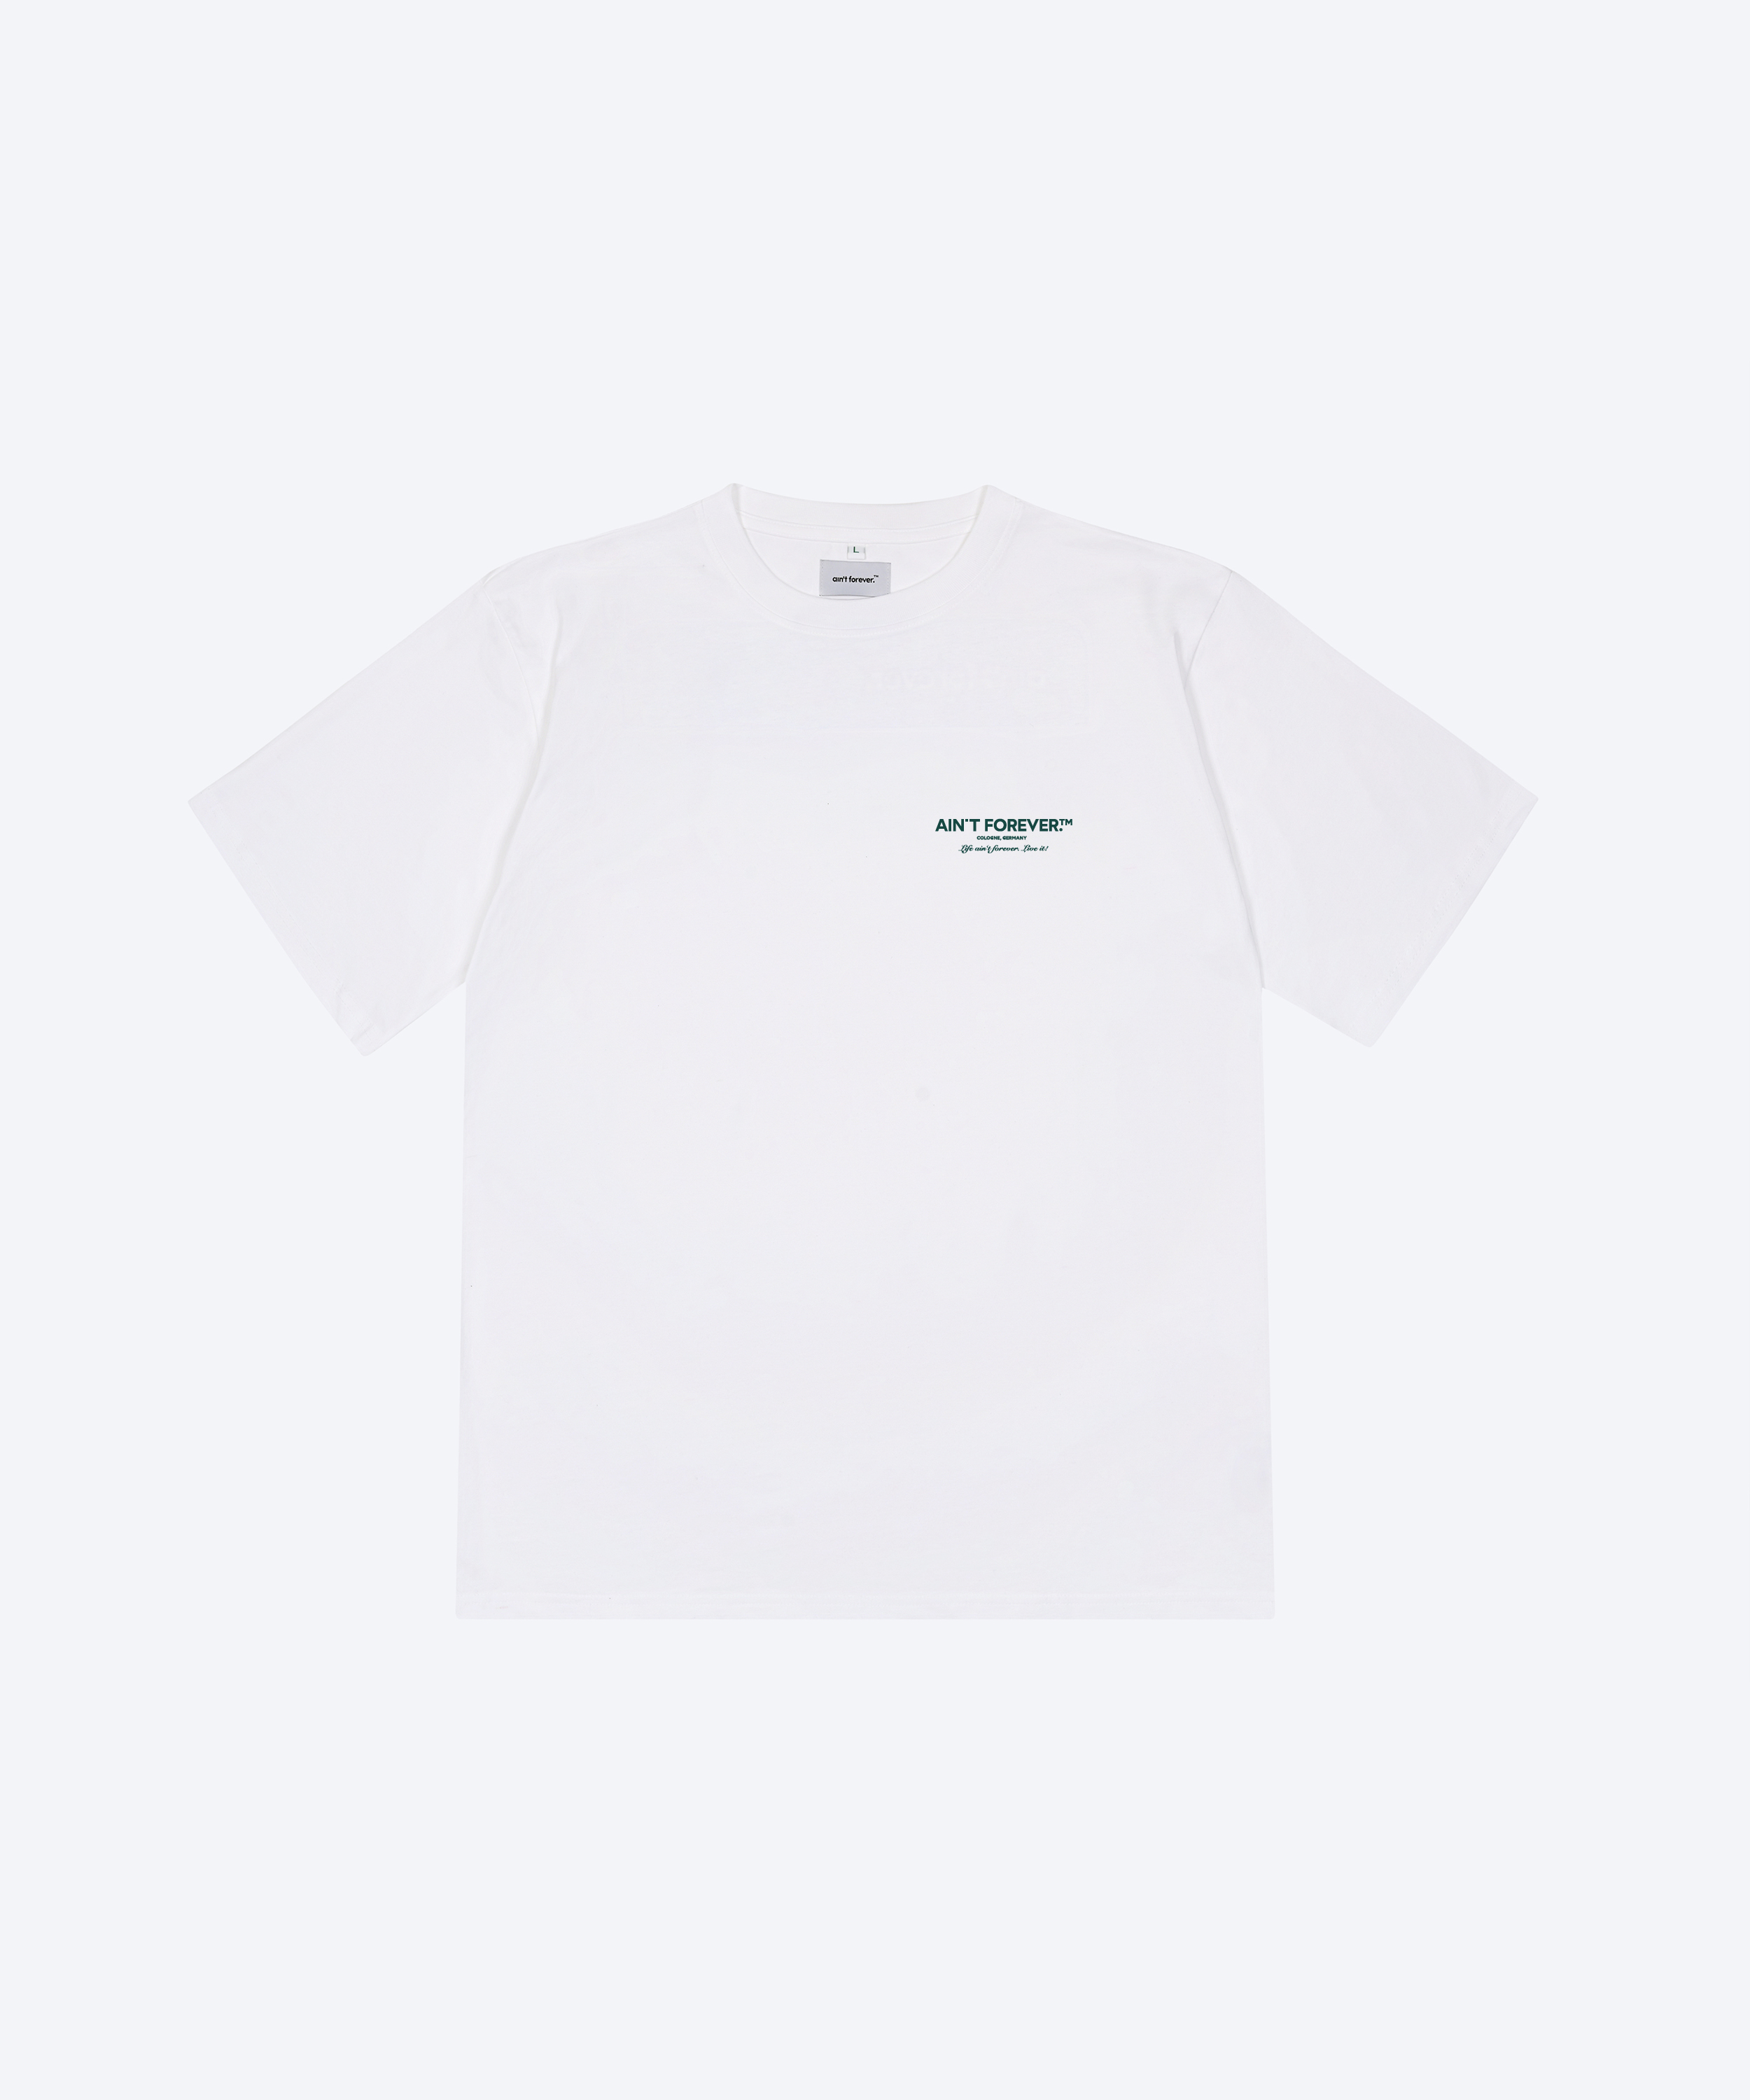 THE OVERSIZED LIVE IT! T-SHIRT (WHITE / GREEN)